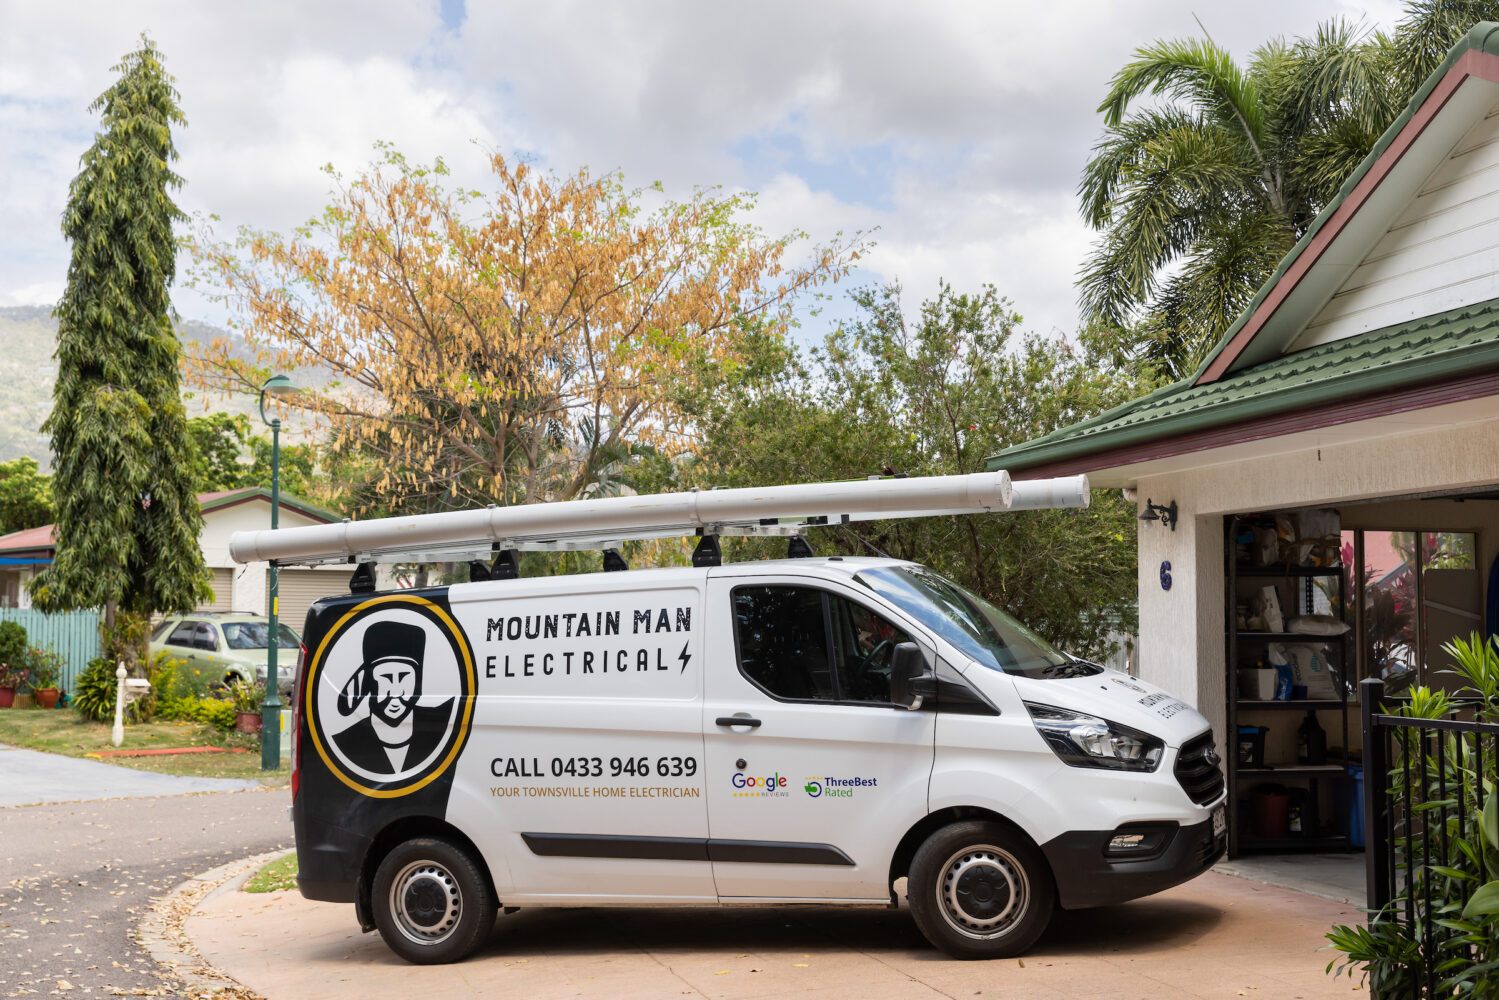 Our Mountain Man Electrical vans are easily recognisable in local Townsville suburbs